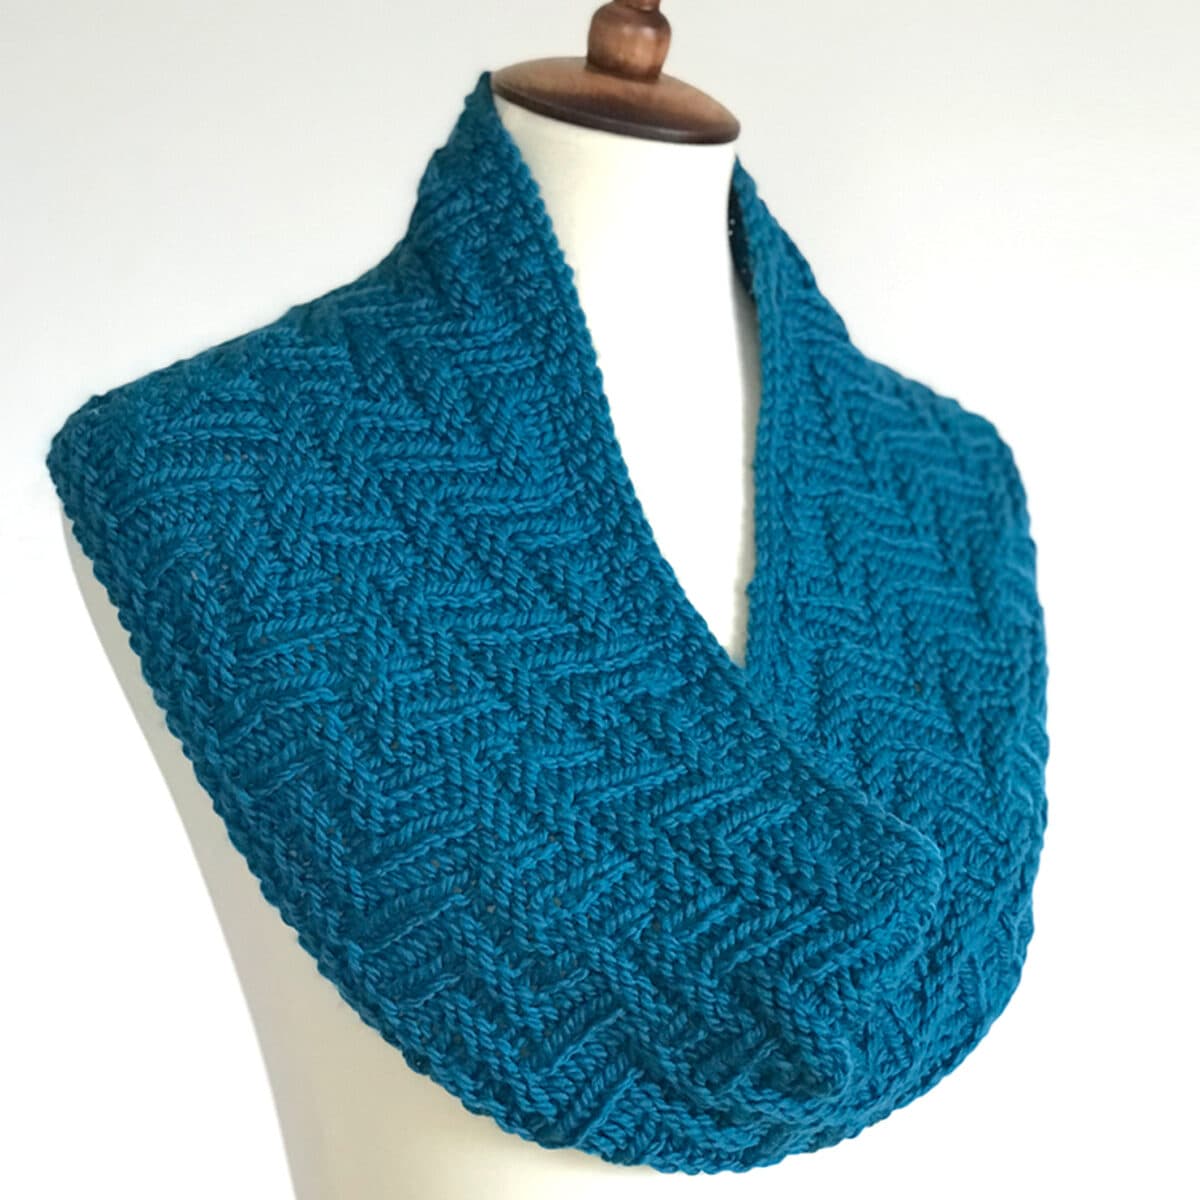 Knitted Scarf in Chevron Zigzag Knit Stitch Pattern texture with blue yarn color on dress form.